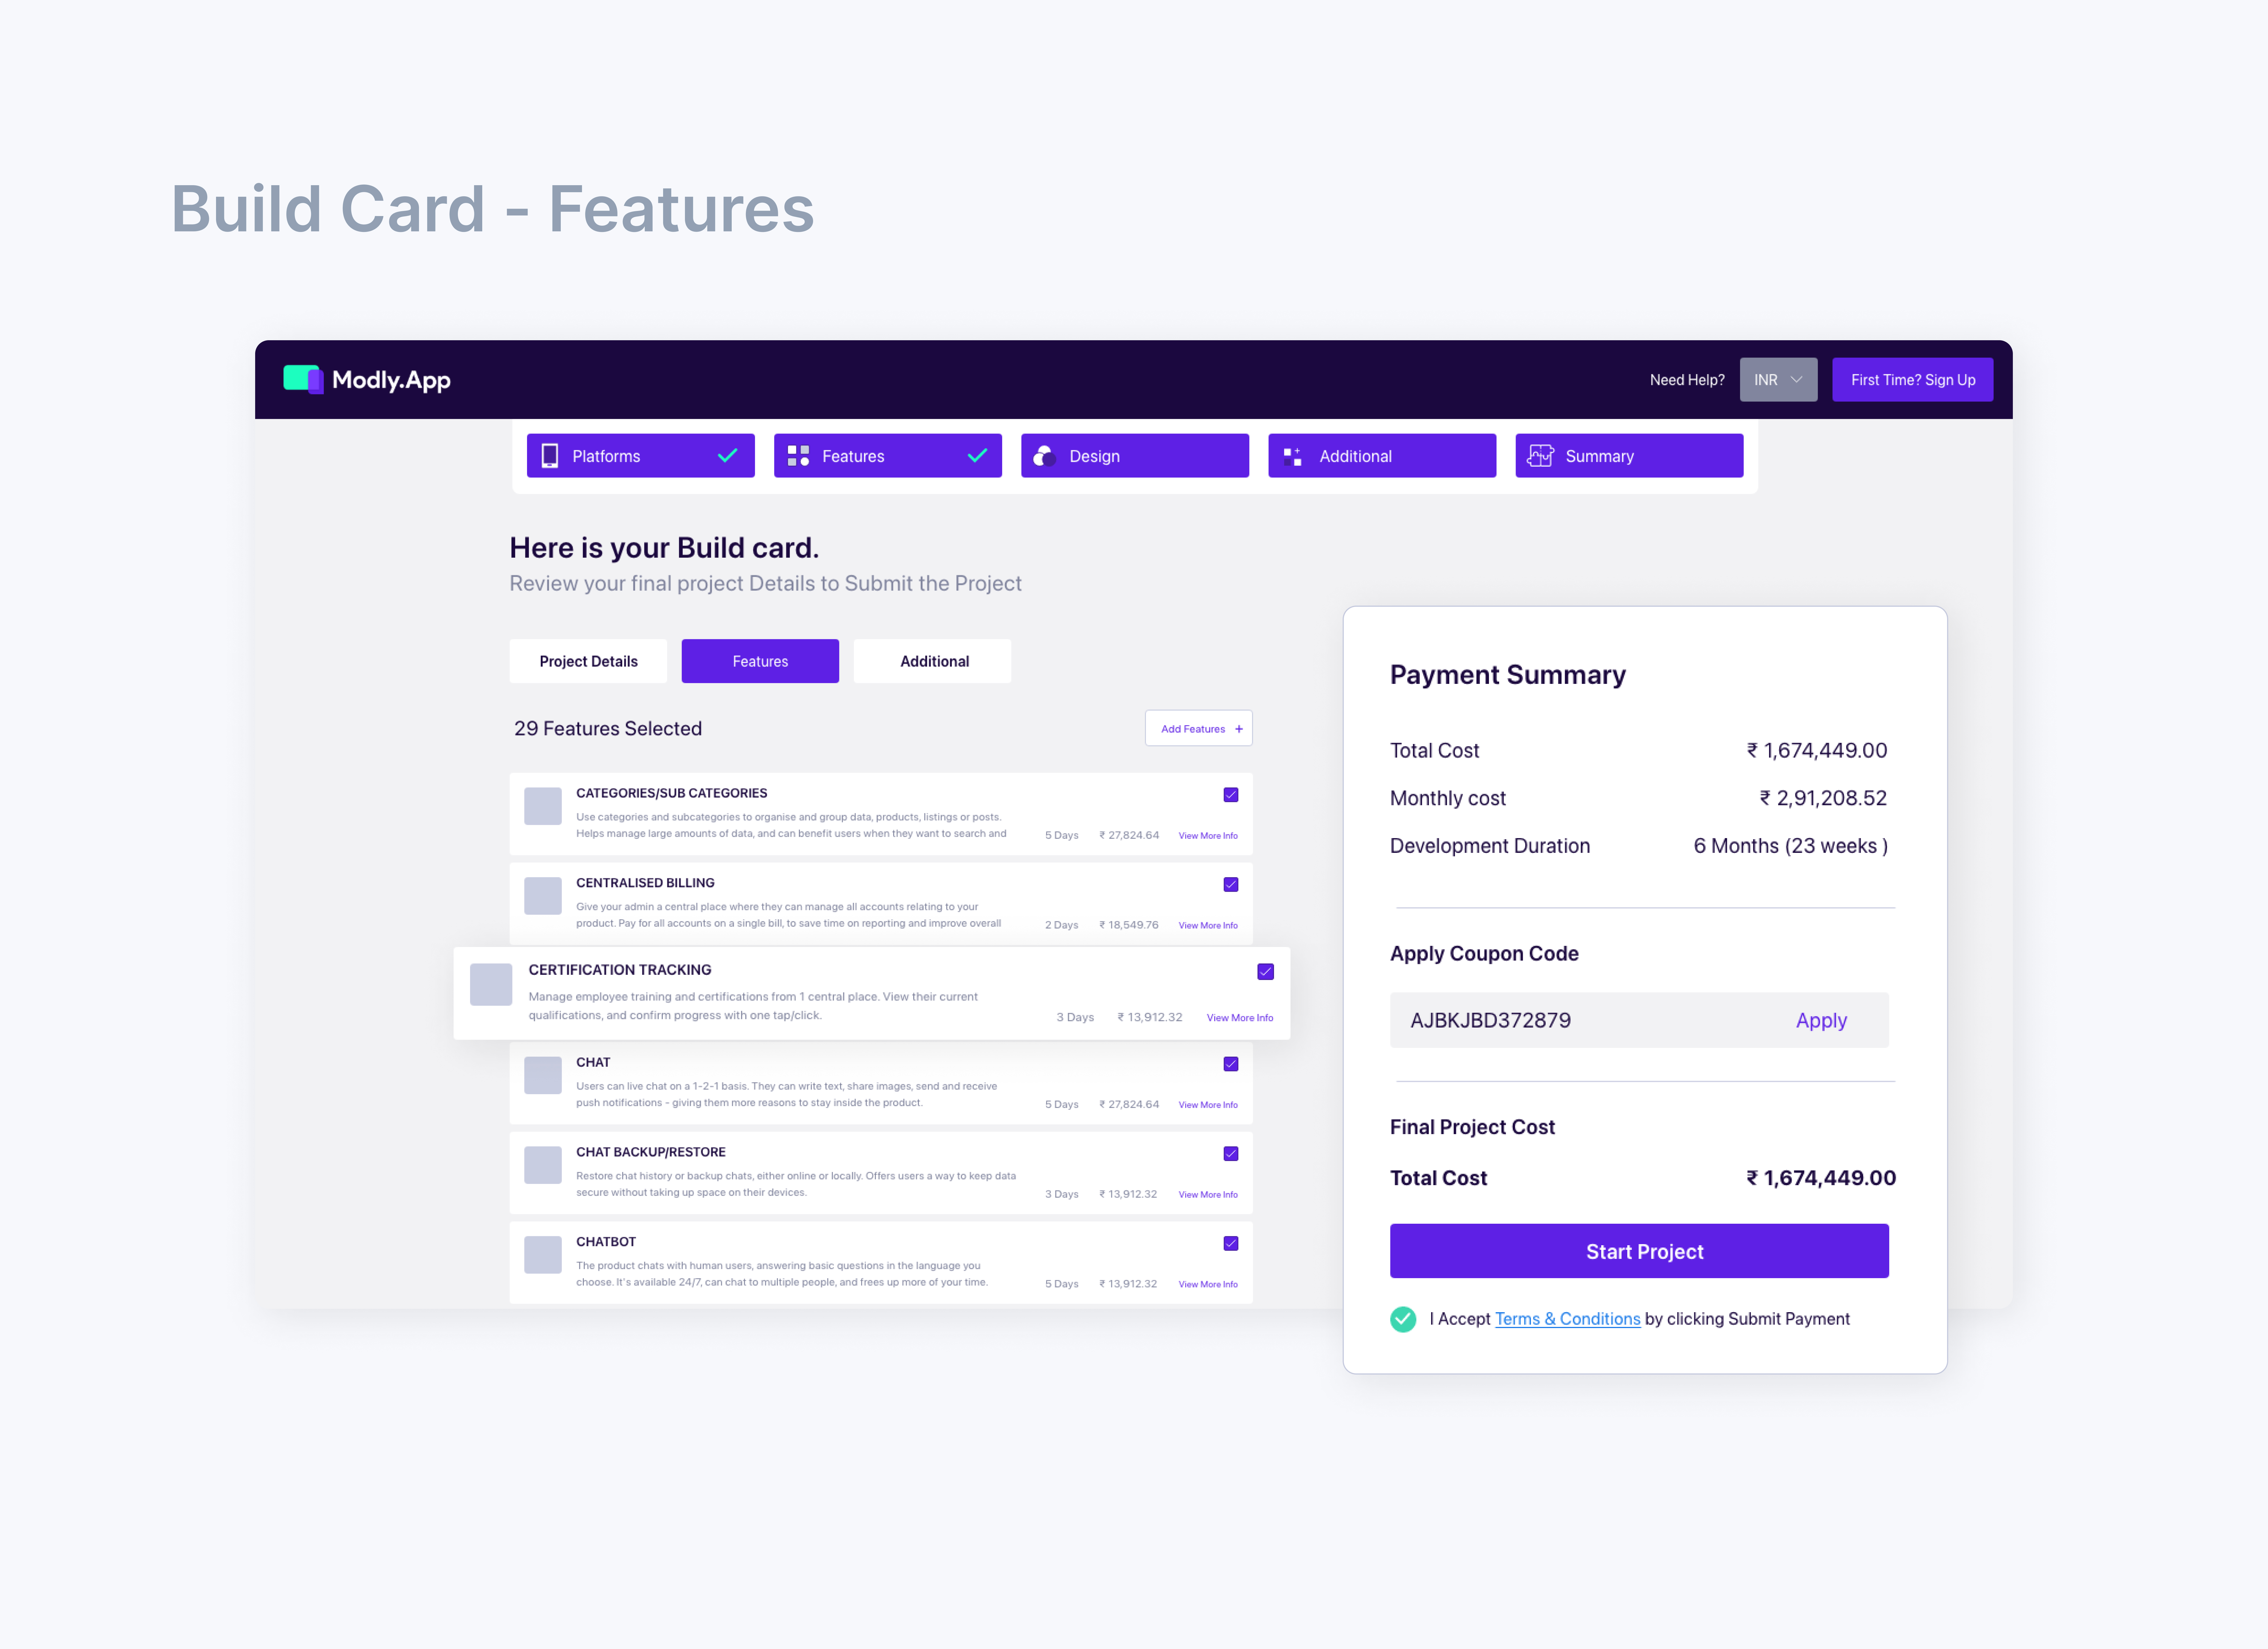 11.Build-Card-Features